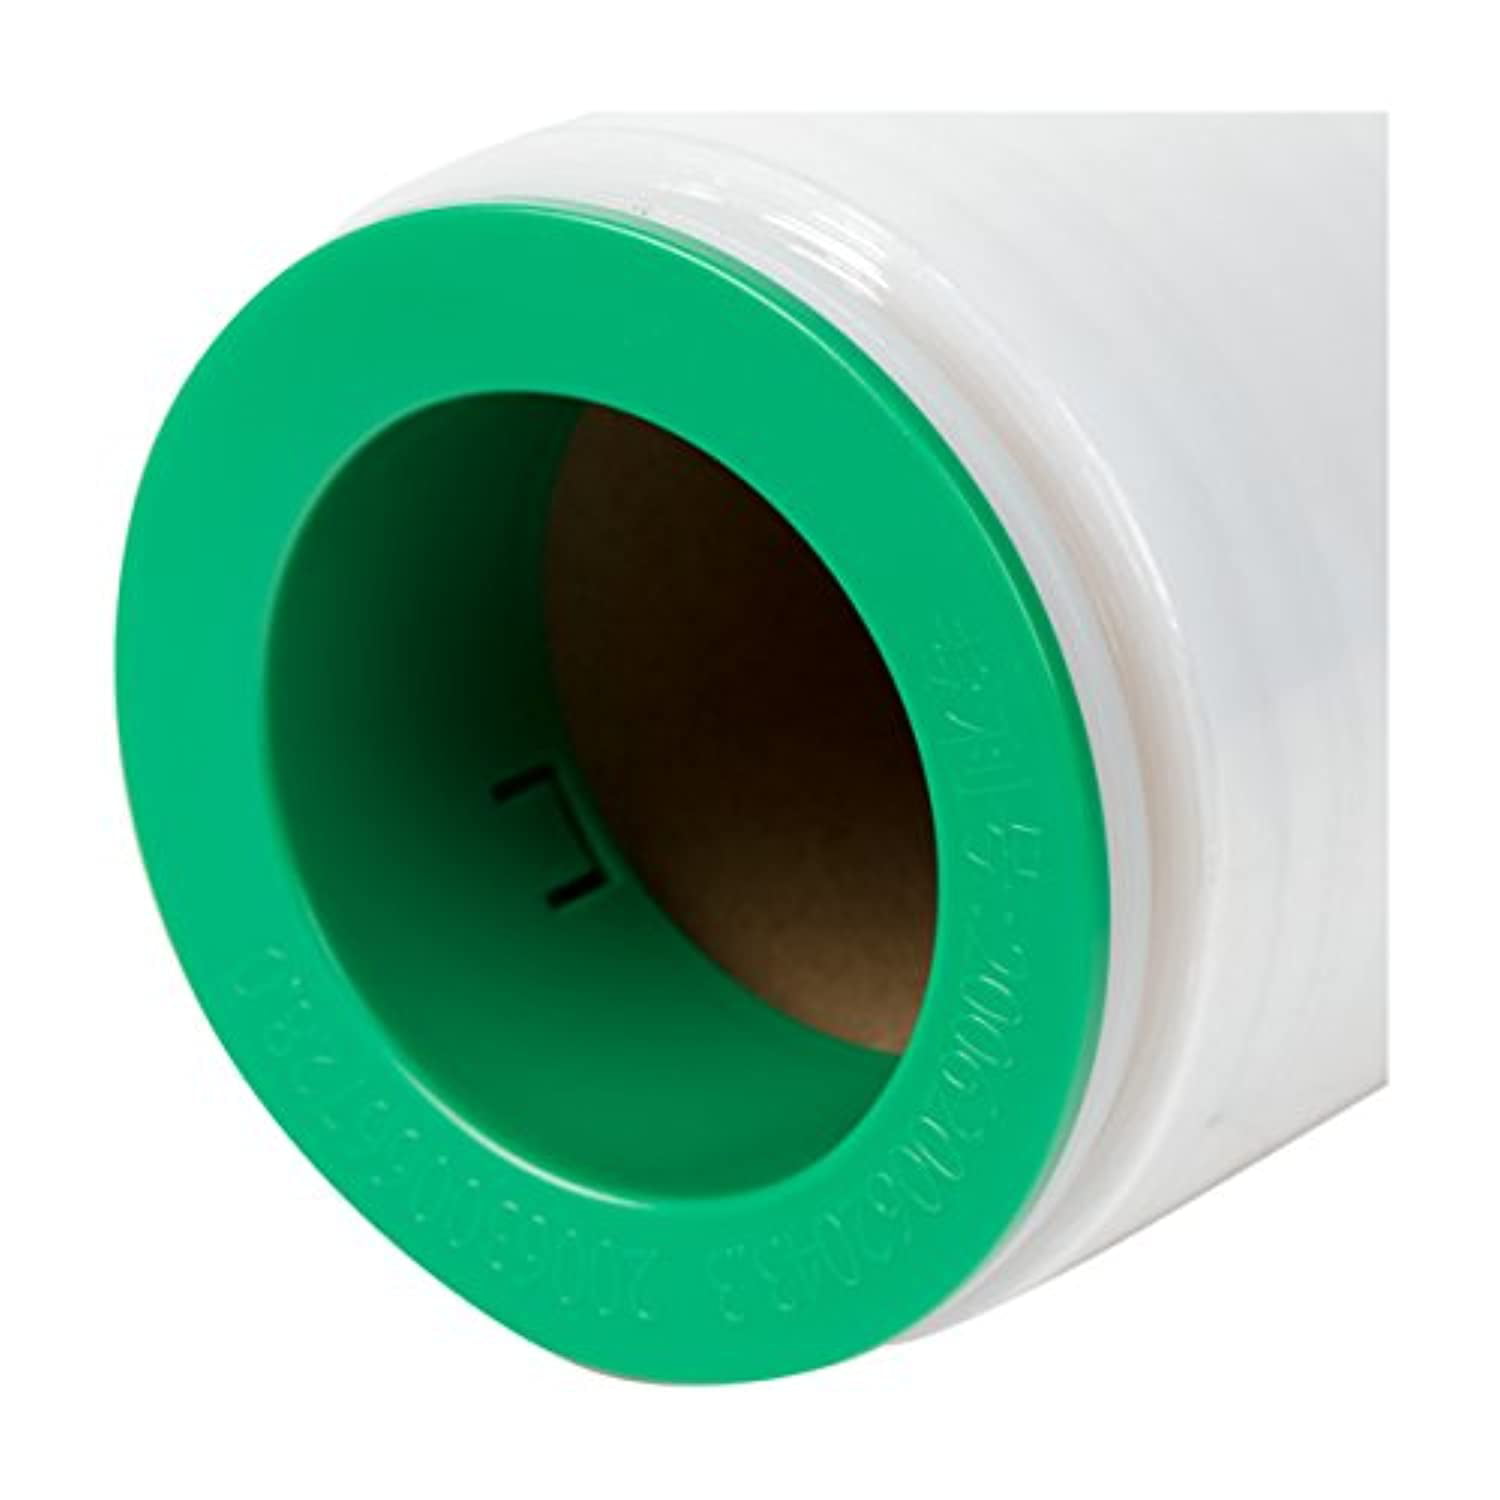 Duck Brand Stretch Wrap Roll 285850 Clear 3 Pack 20 inches by 1000 feet